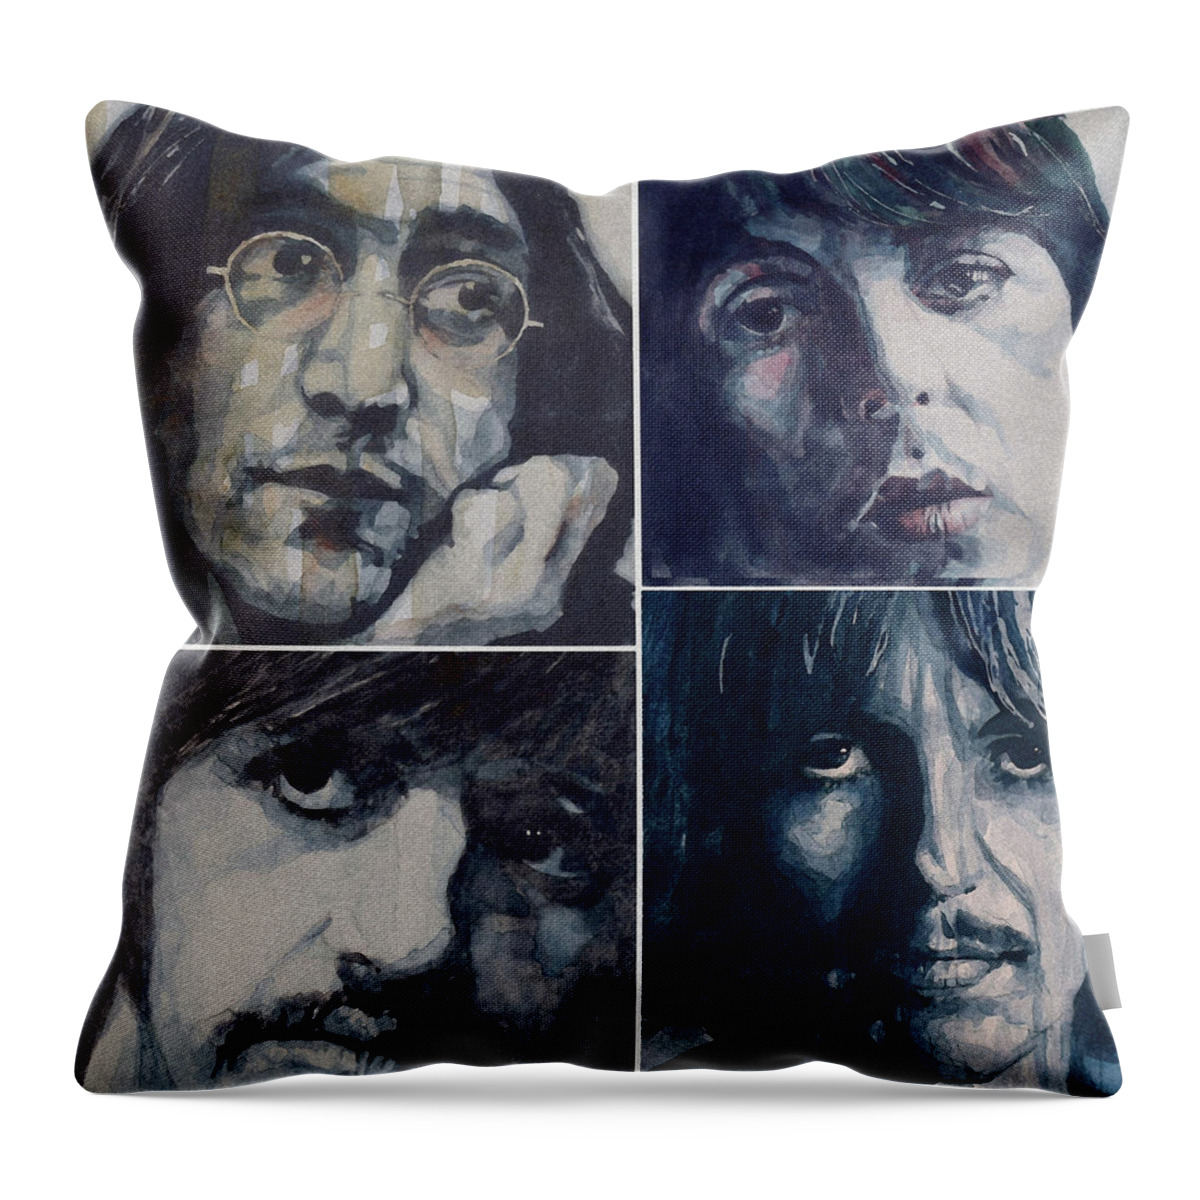 The Beatles Throw Pillow featuring the painting Reunion by Paul Lovering